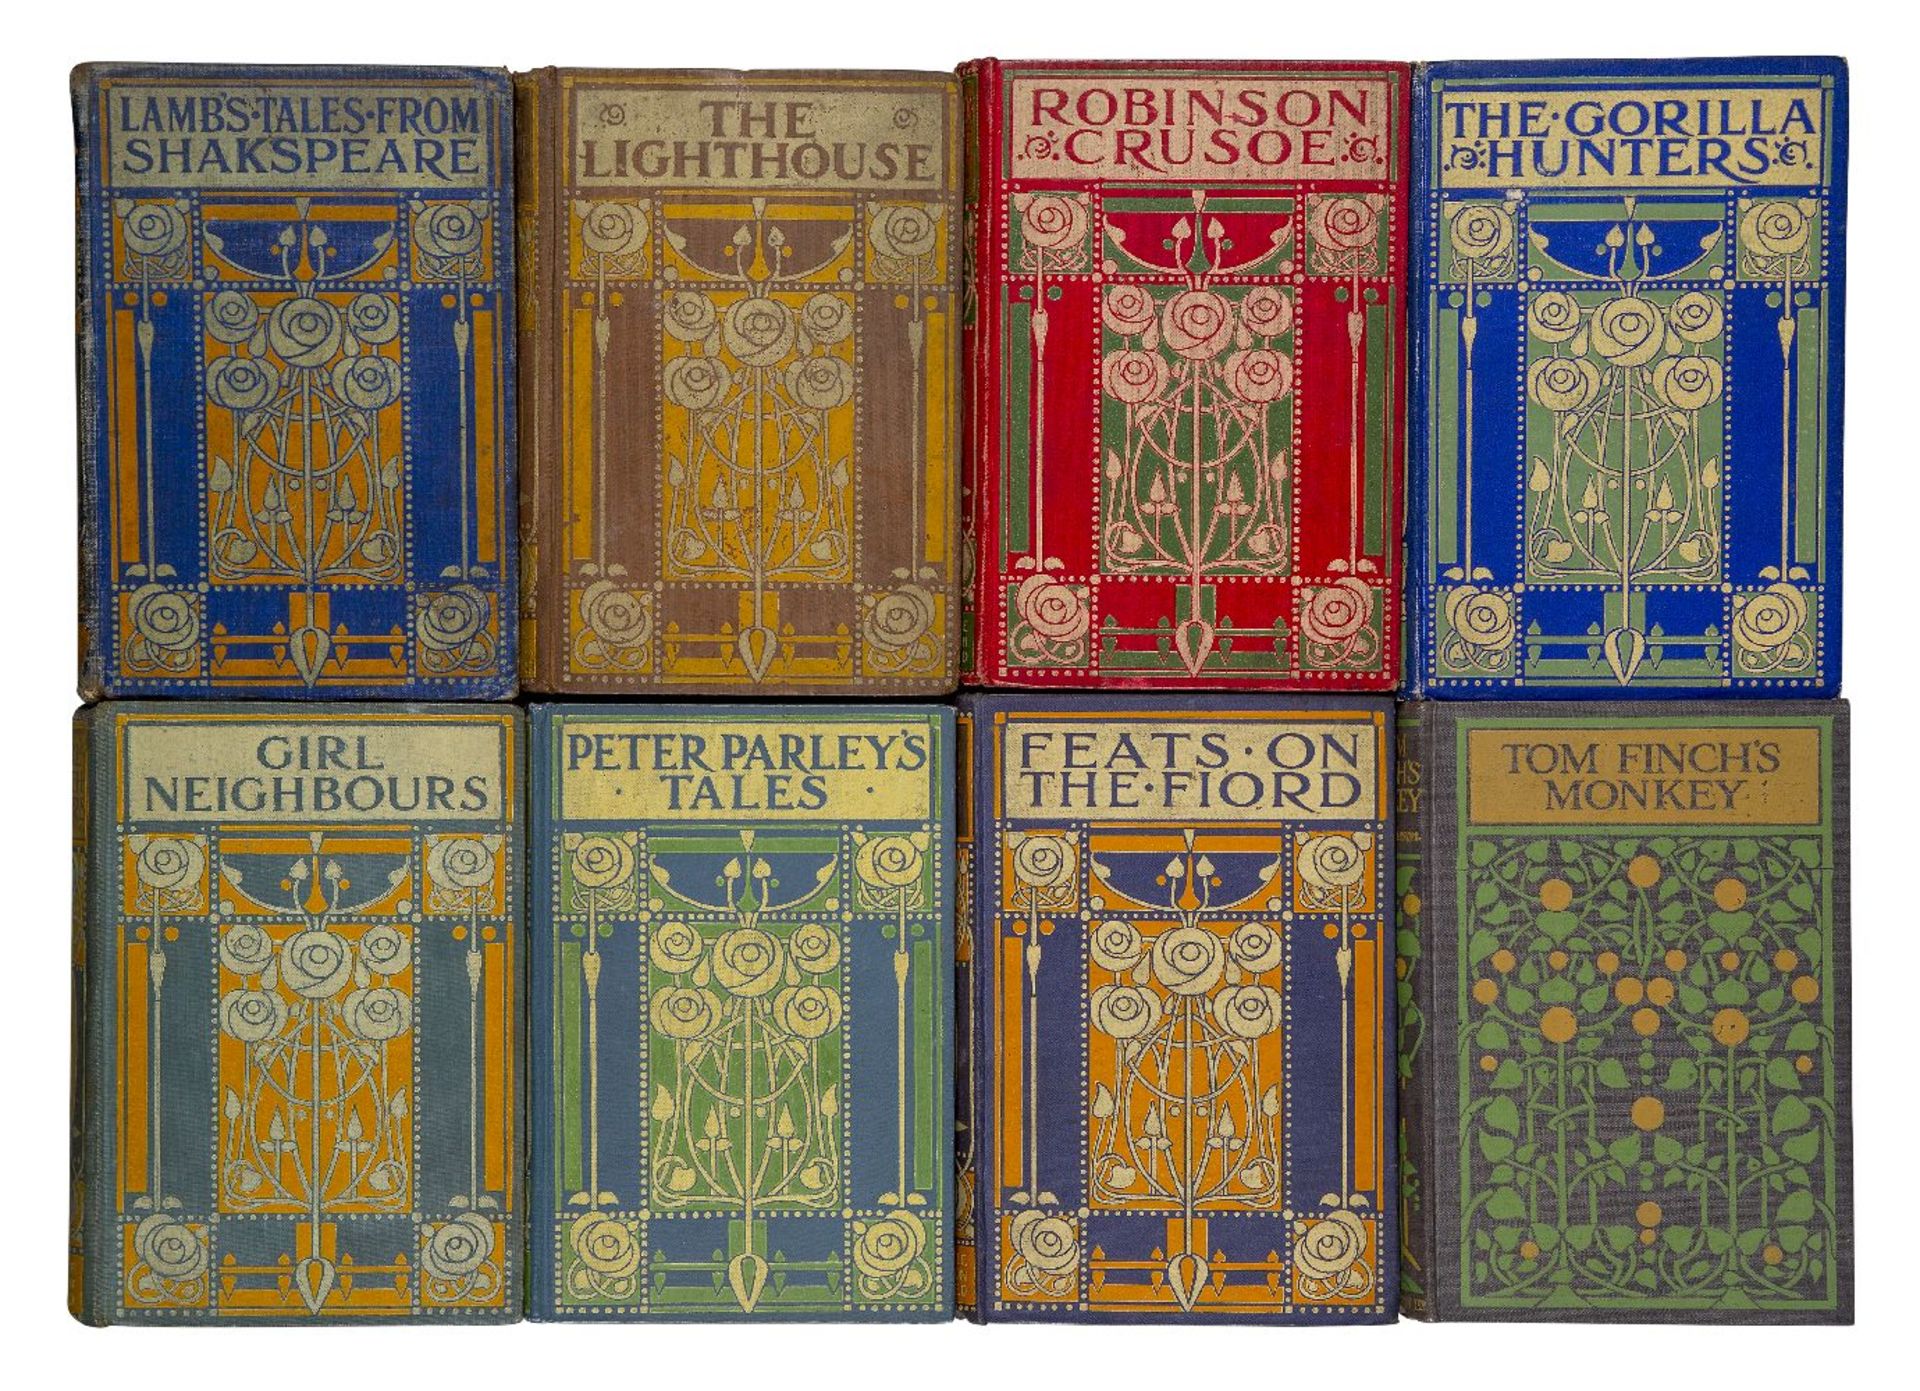 Blackie and Son Ltd, a quantity of books with decorative covers, some in the ‘Glasgow school’ - Image 7 of 8